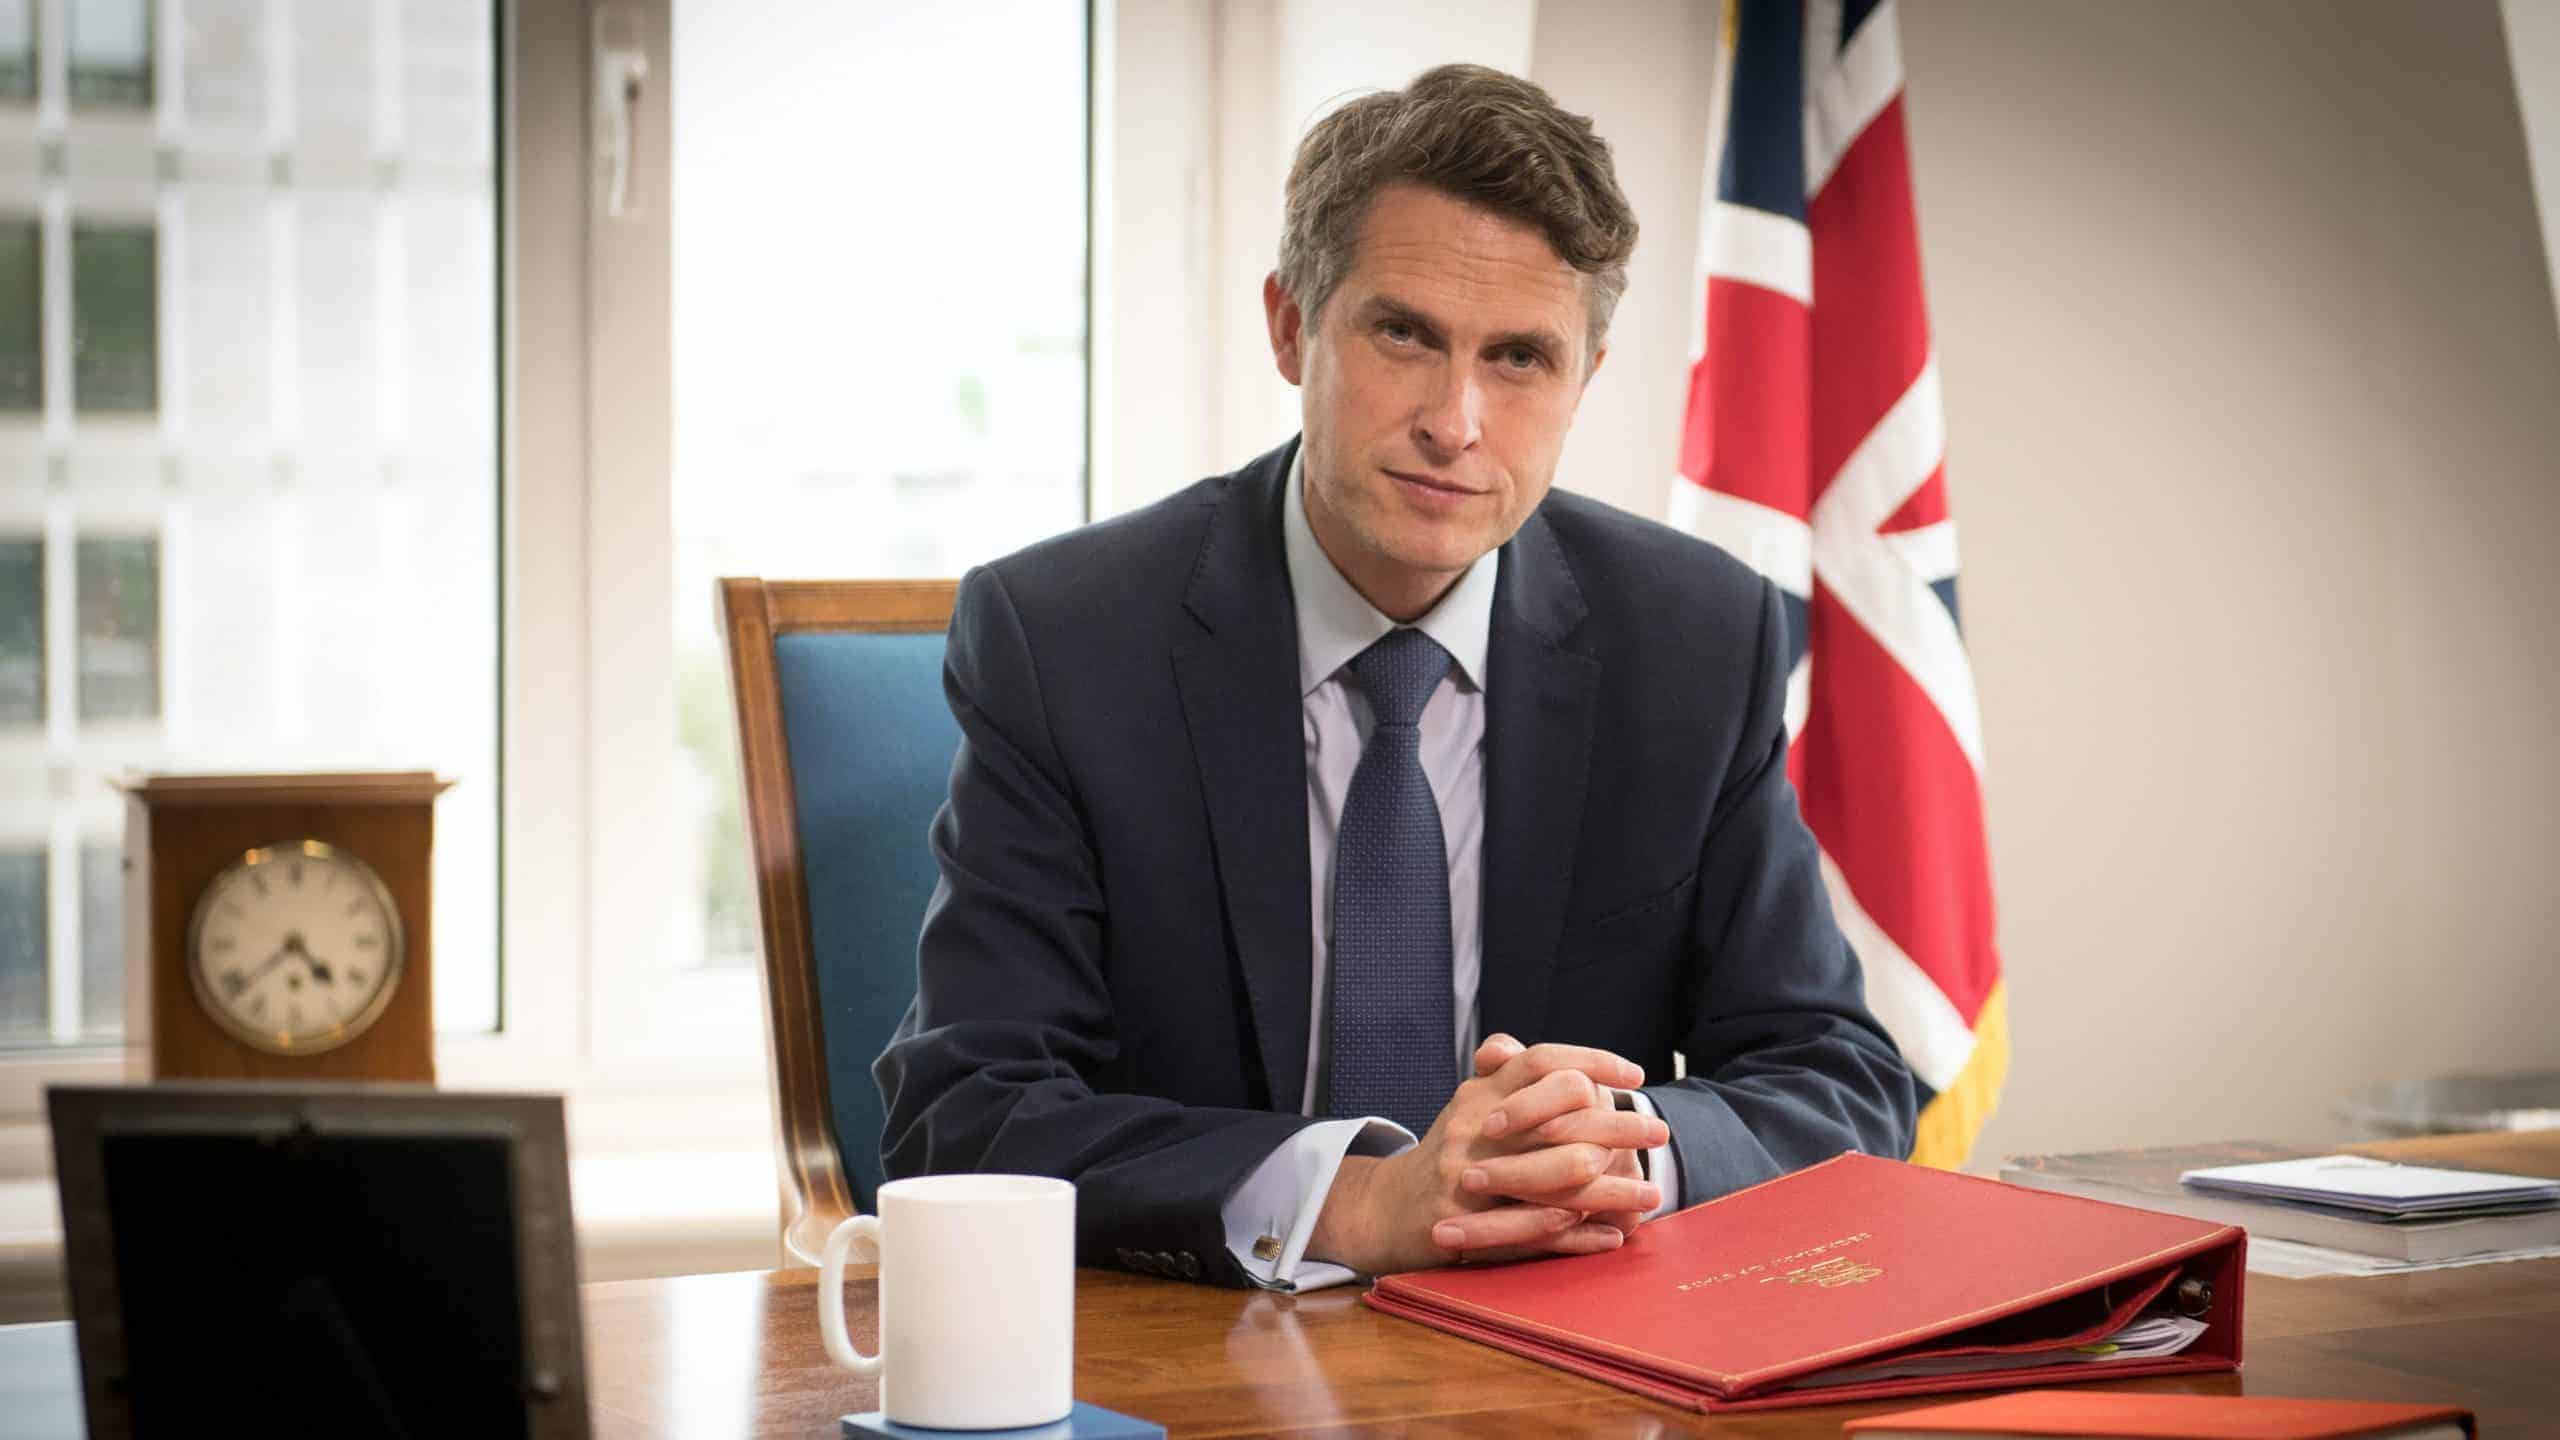 People are concerned with Gavin Williamson’s apology picture